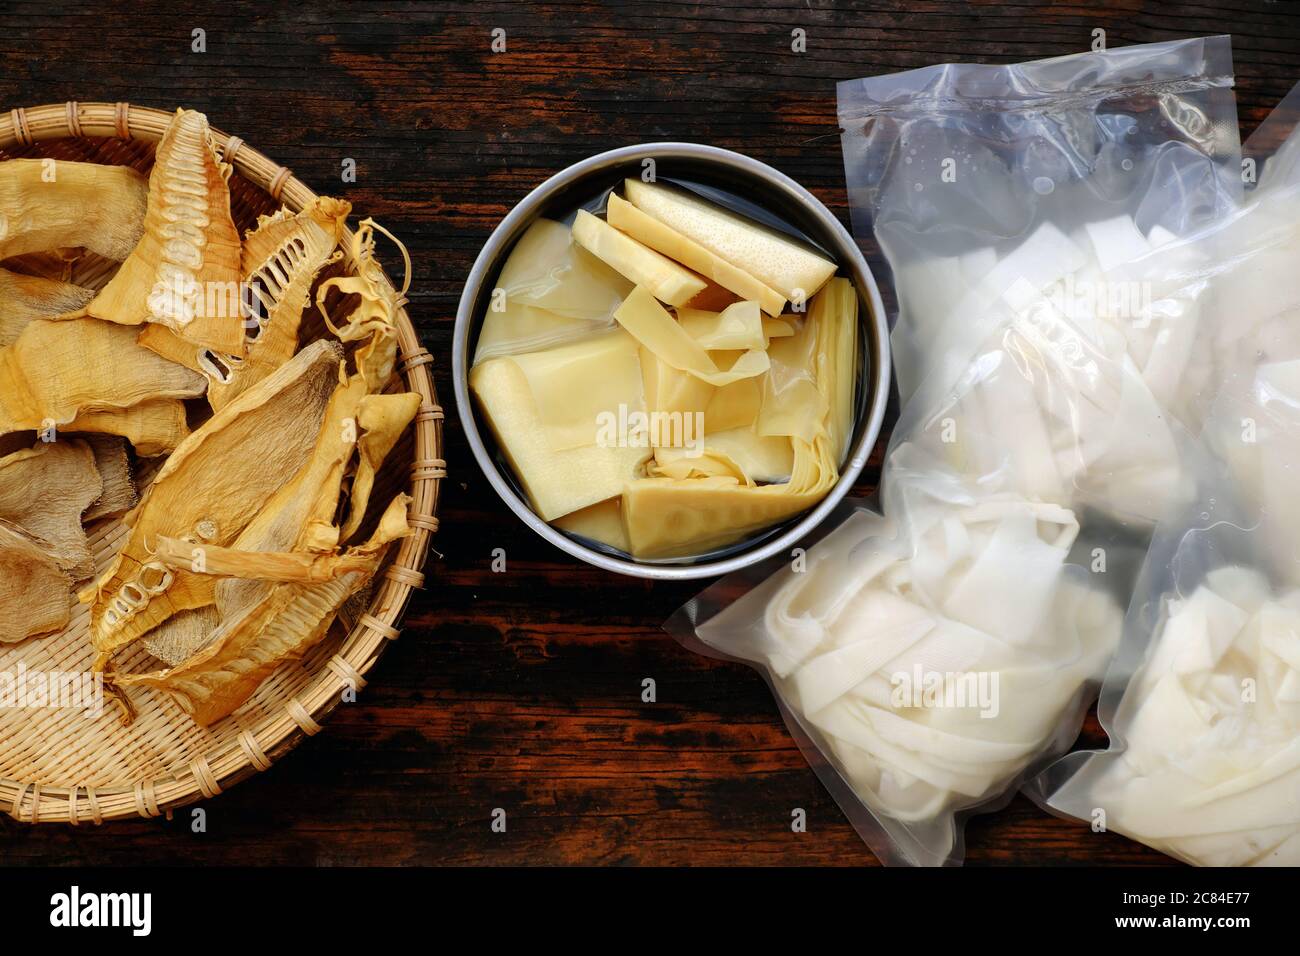 Top view bamboo shoots with three processing are dry, brined, boil to make raw material for many Vietnamese vegan food Stock Photo